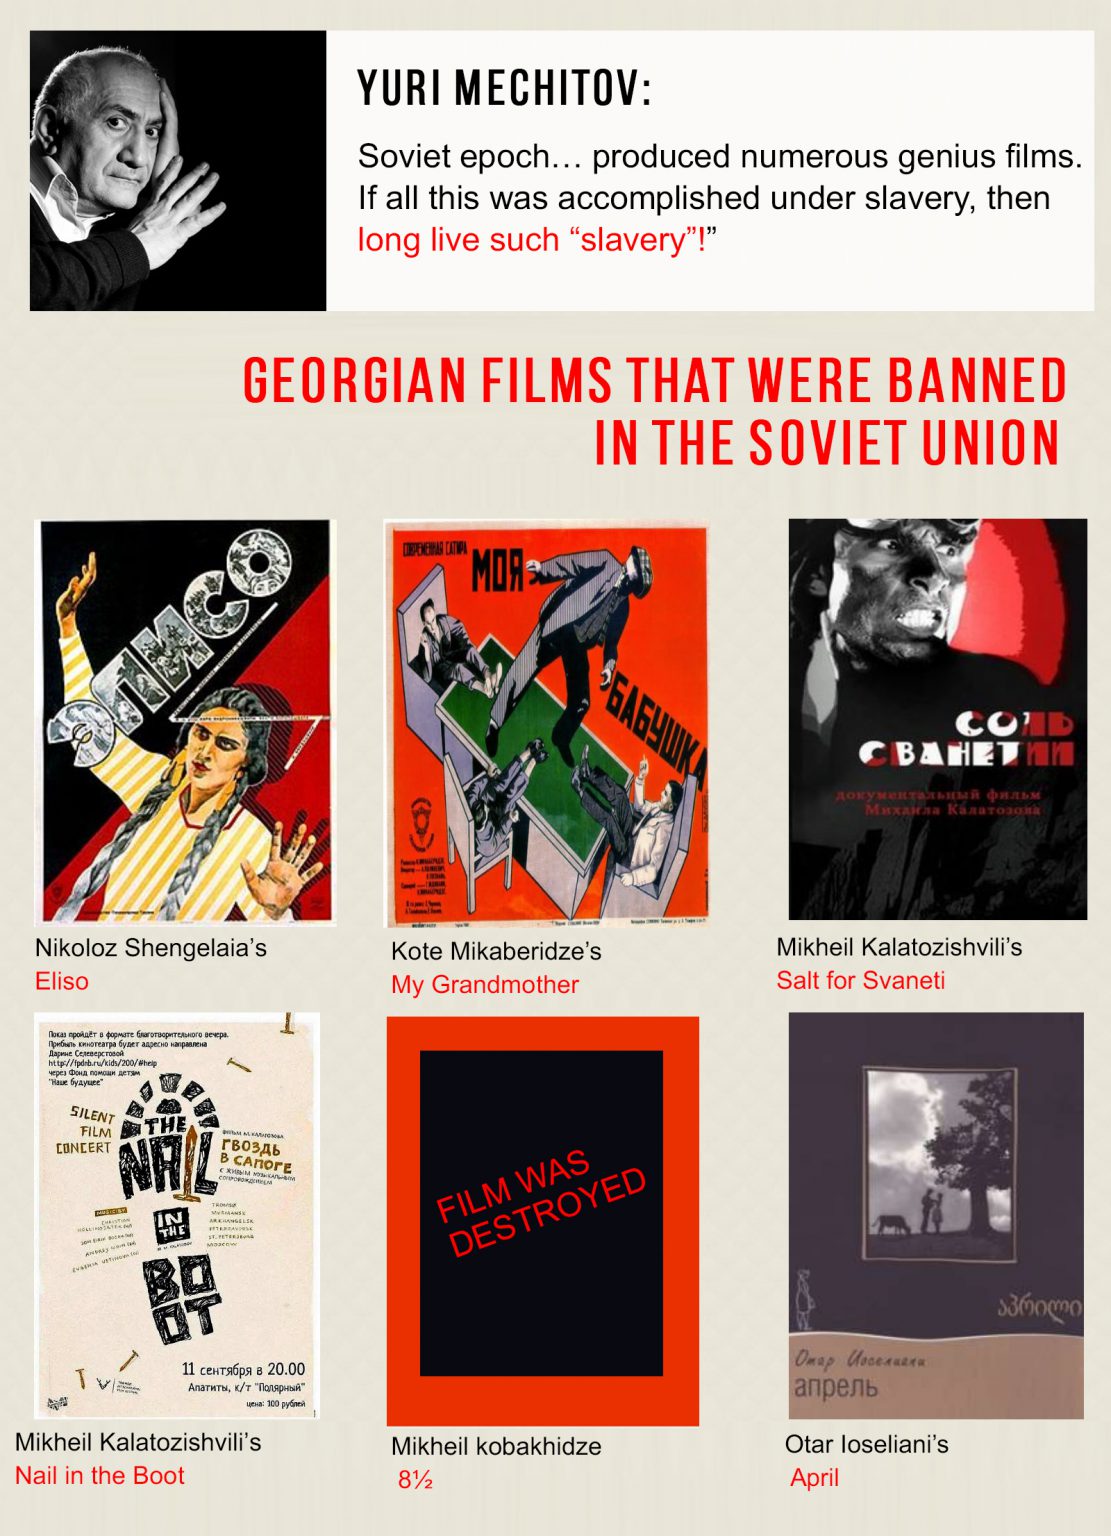 Literature and Films Banned in Soviet “Slavery”